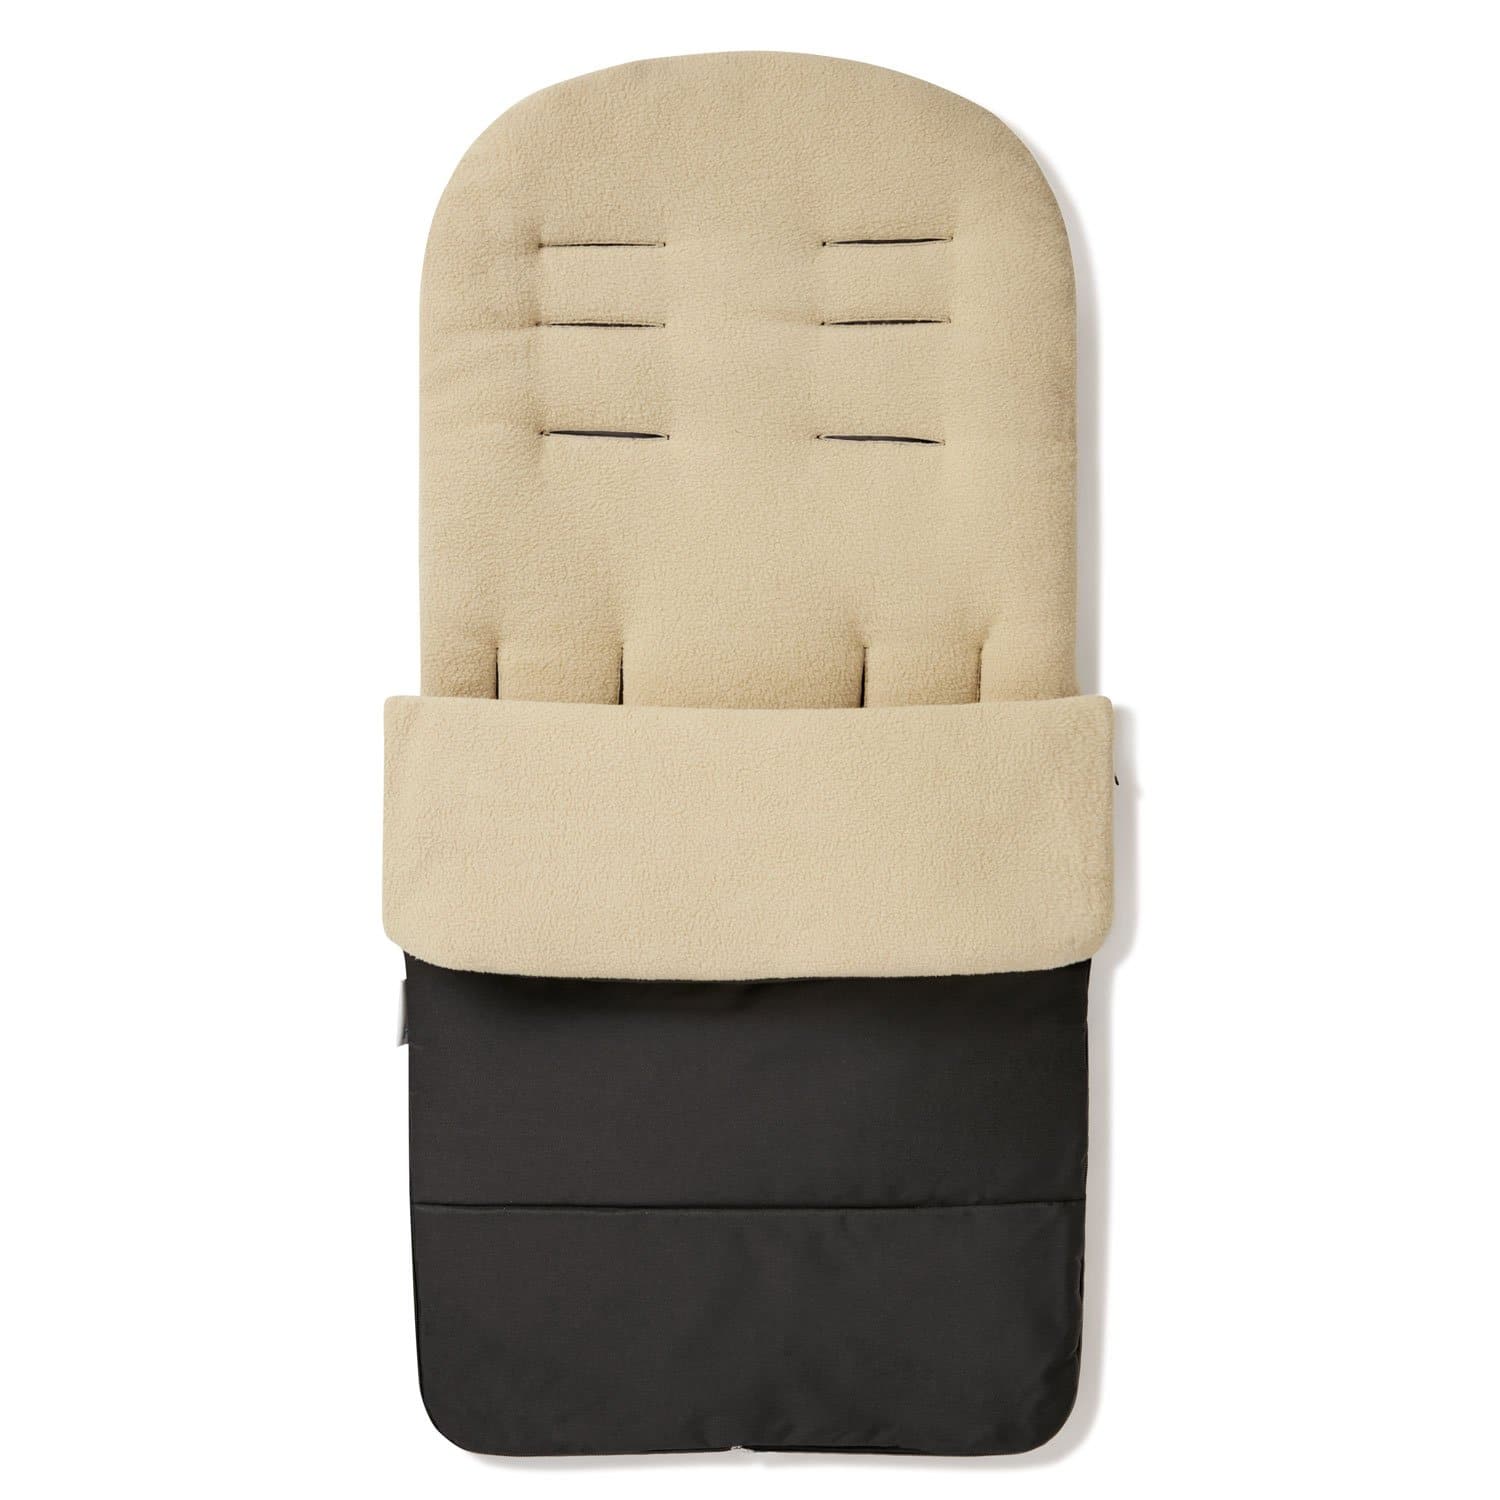 Premium Footmuff / Cosy Toes Compatible with Kiddicare - Desert Sand / Fits All Models | For Your Little One